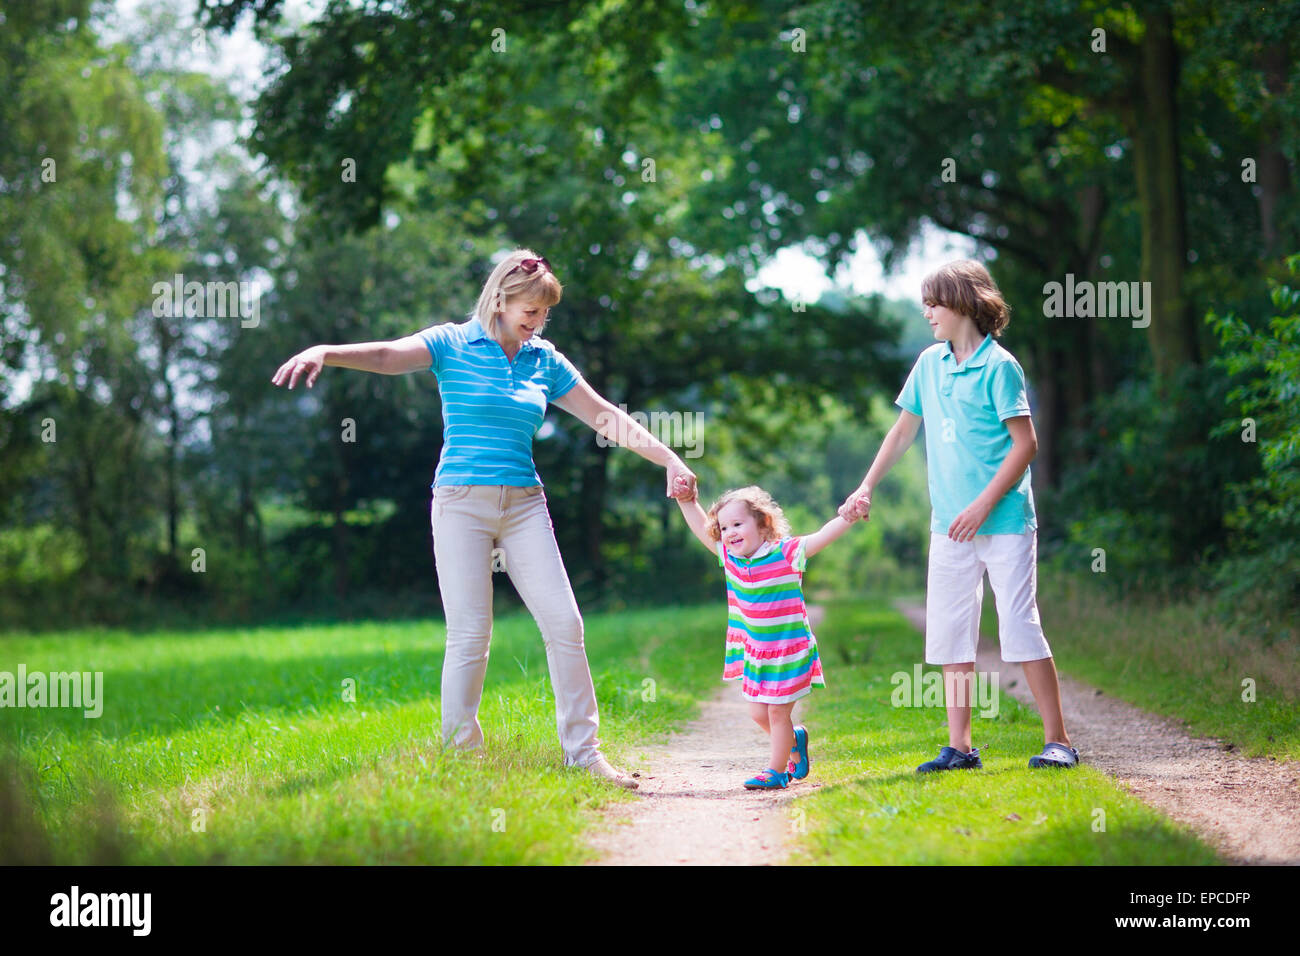 Happy active woman enjoying hiking with two children, school age boy and cute curly toddler girl walking together Stock Photo